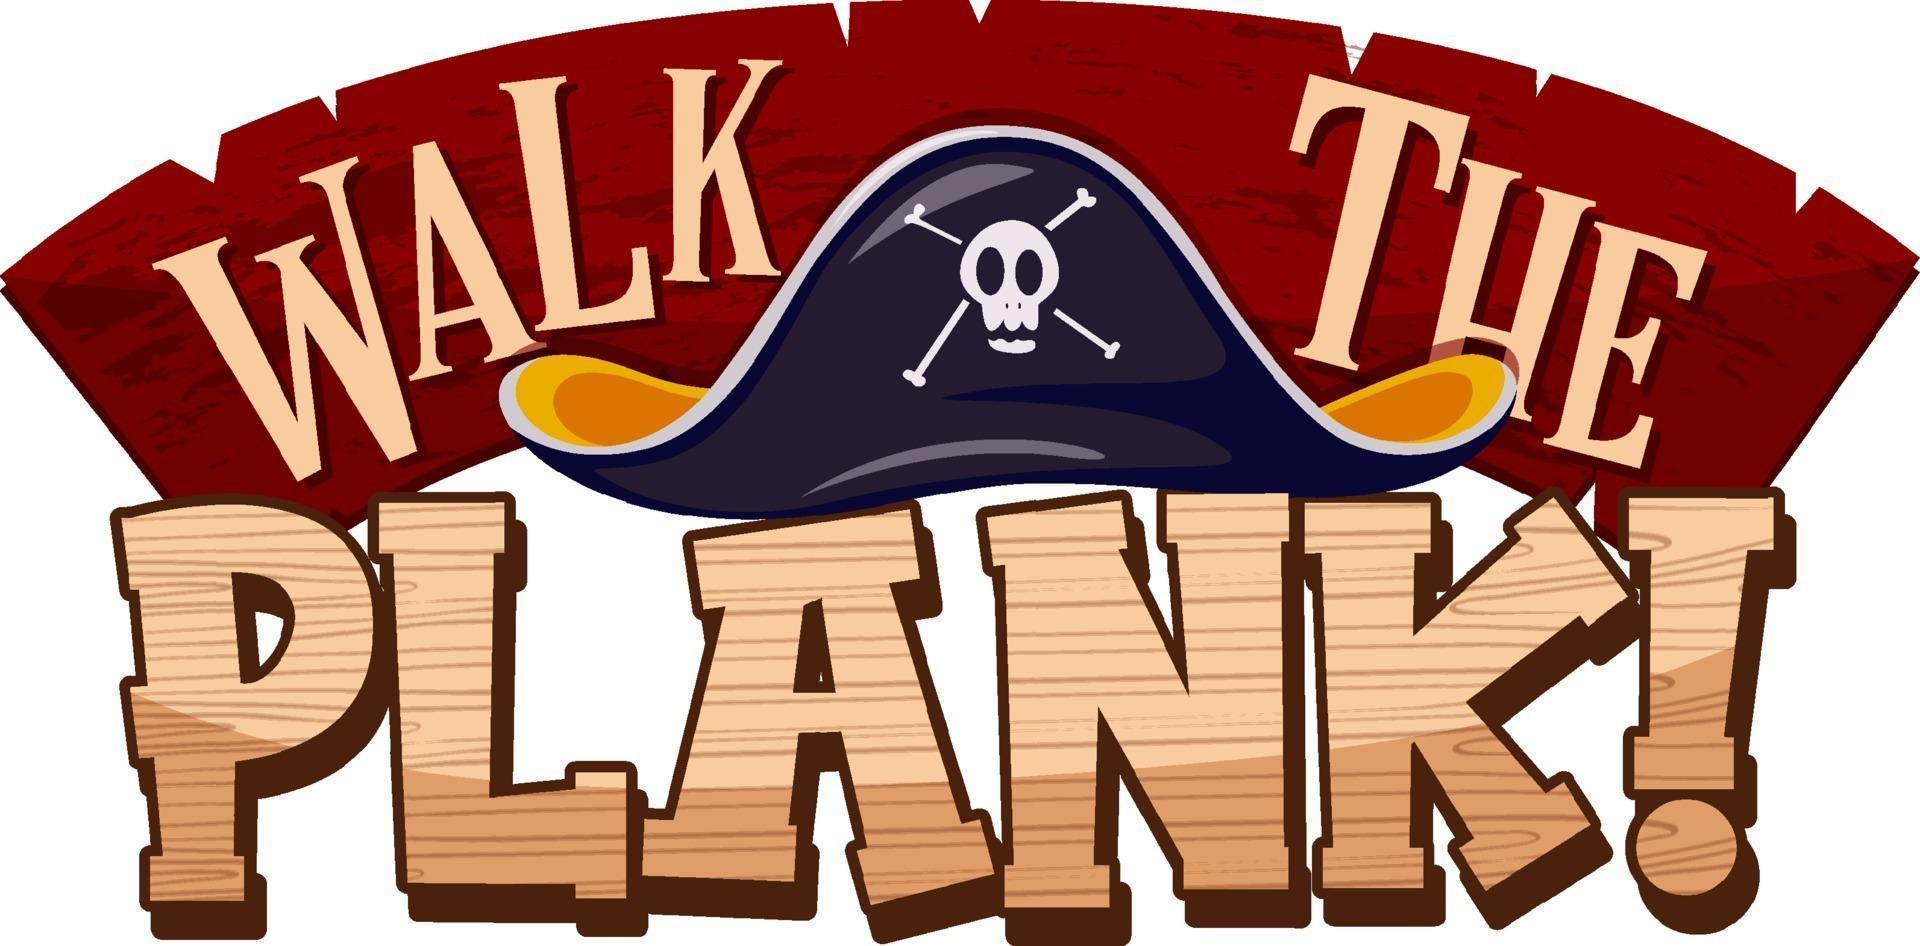 Pirate concept with walk the plank font banner on white background vector